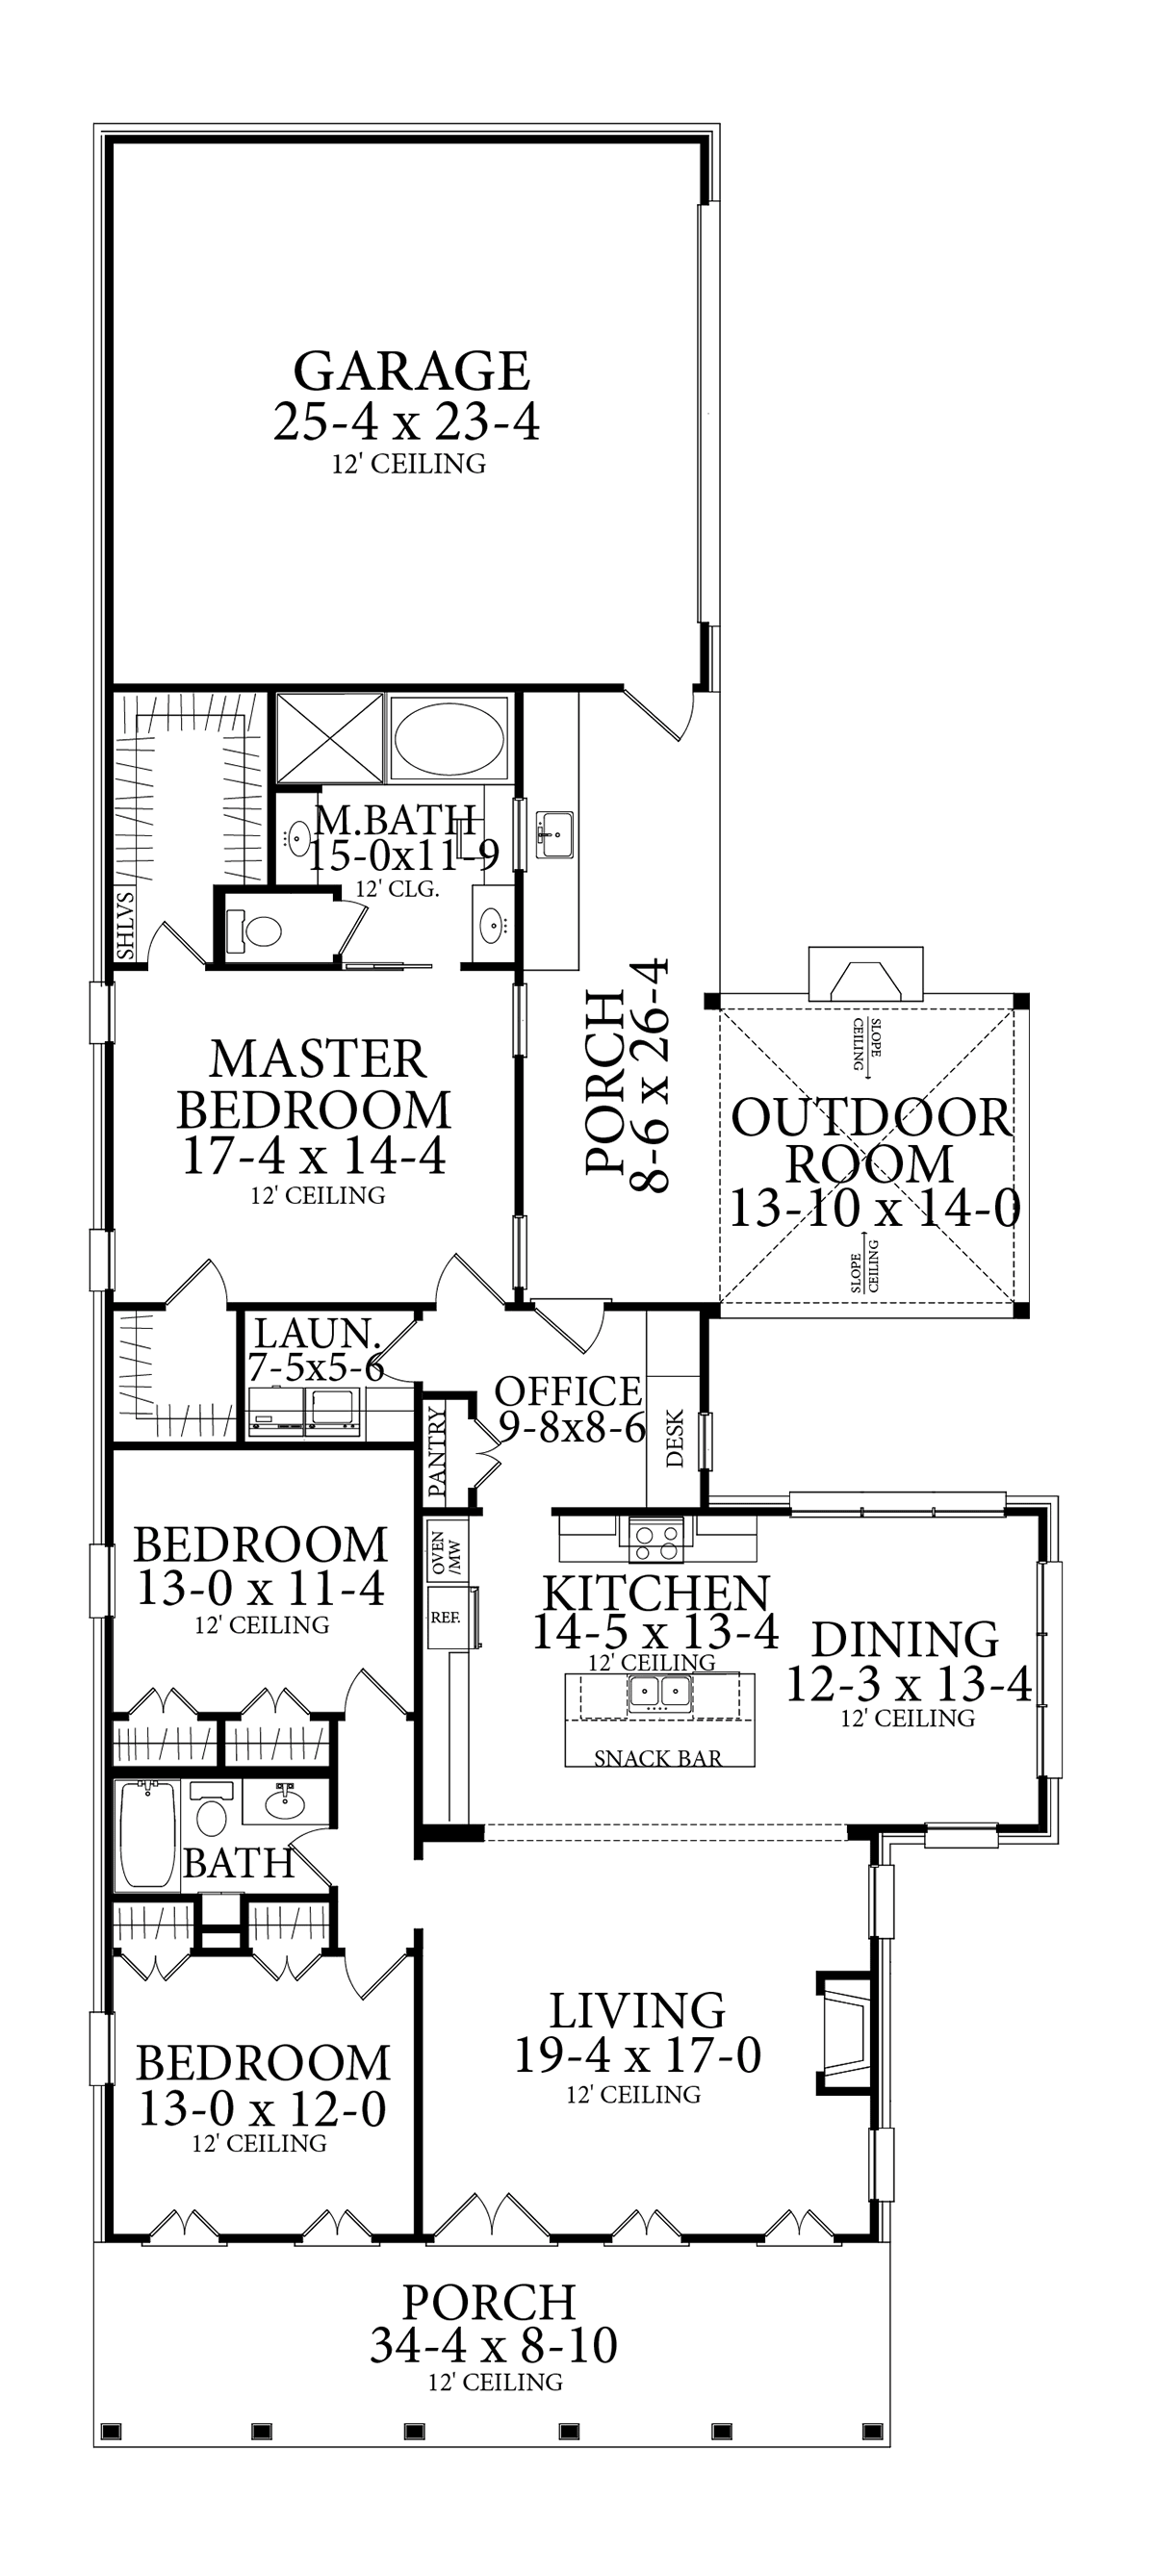 House Plan 40044 Traditional Style With 1927 Sq Ft 3 Bed 2 Bath